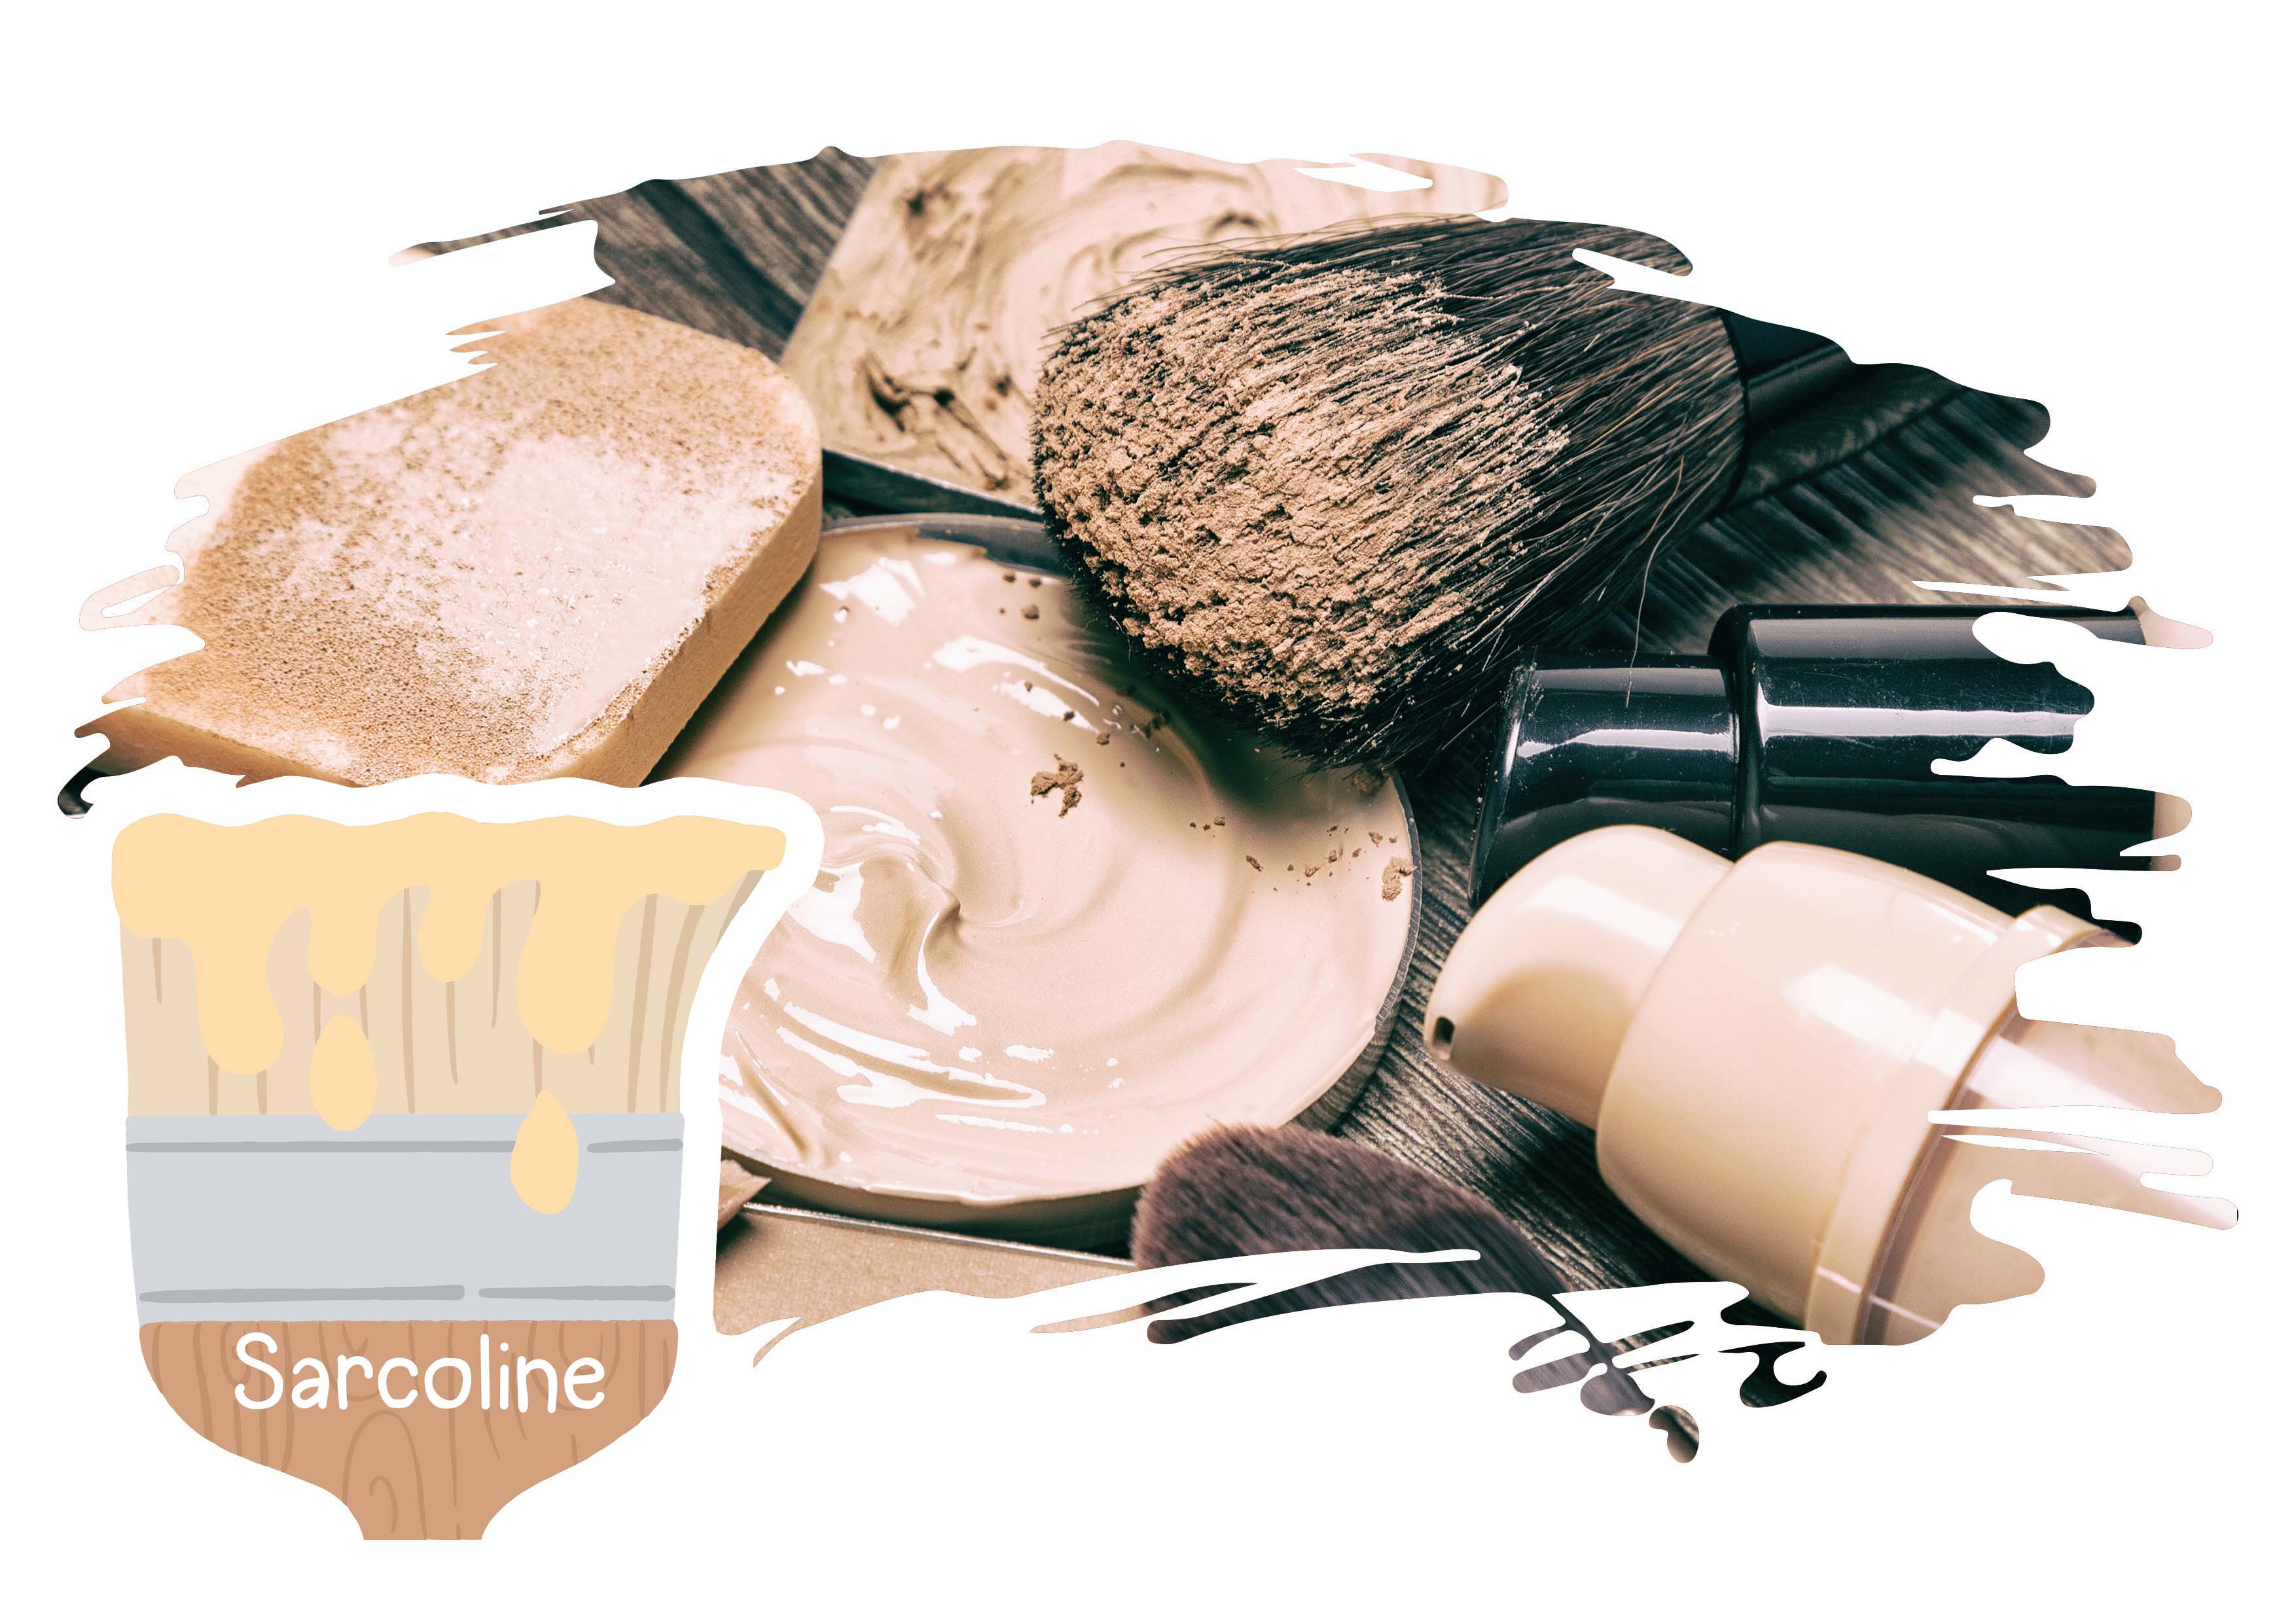 Sarcoline, Make up products for flawless complexion